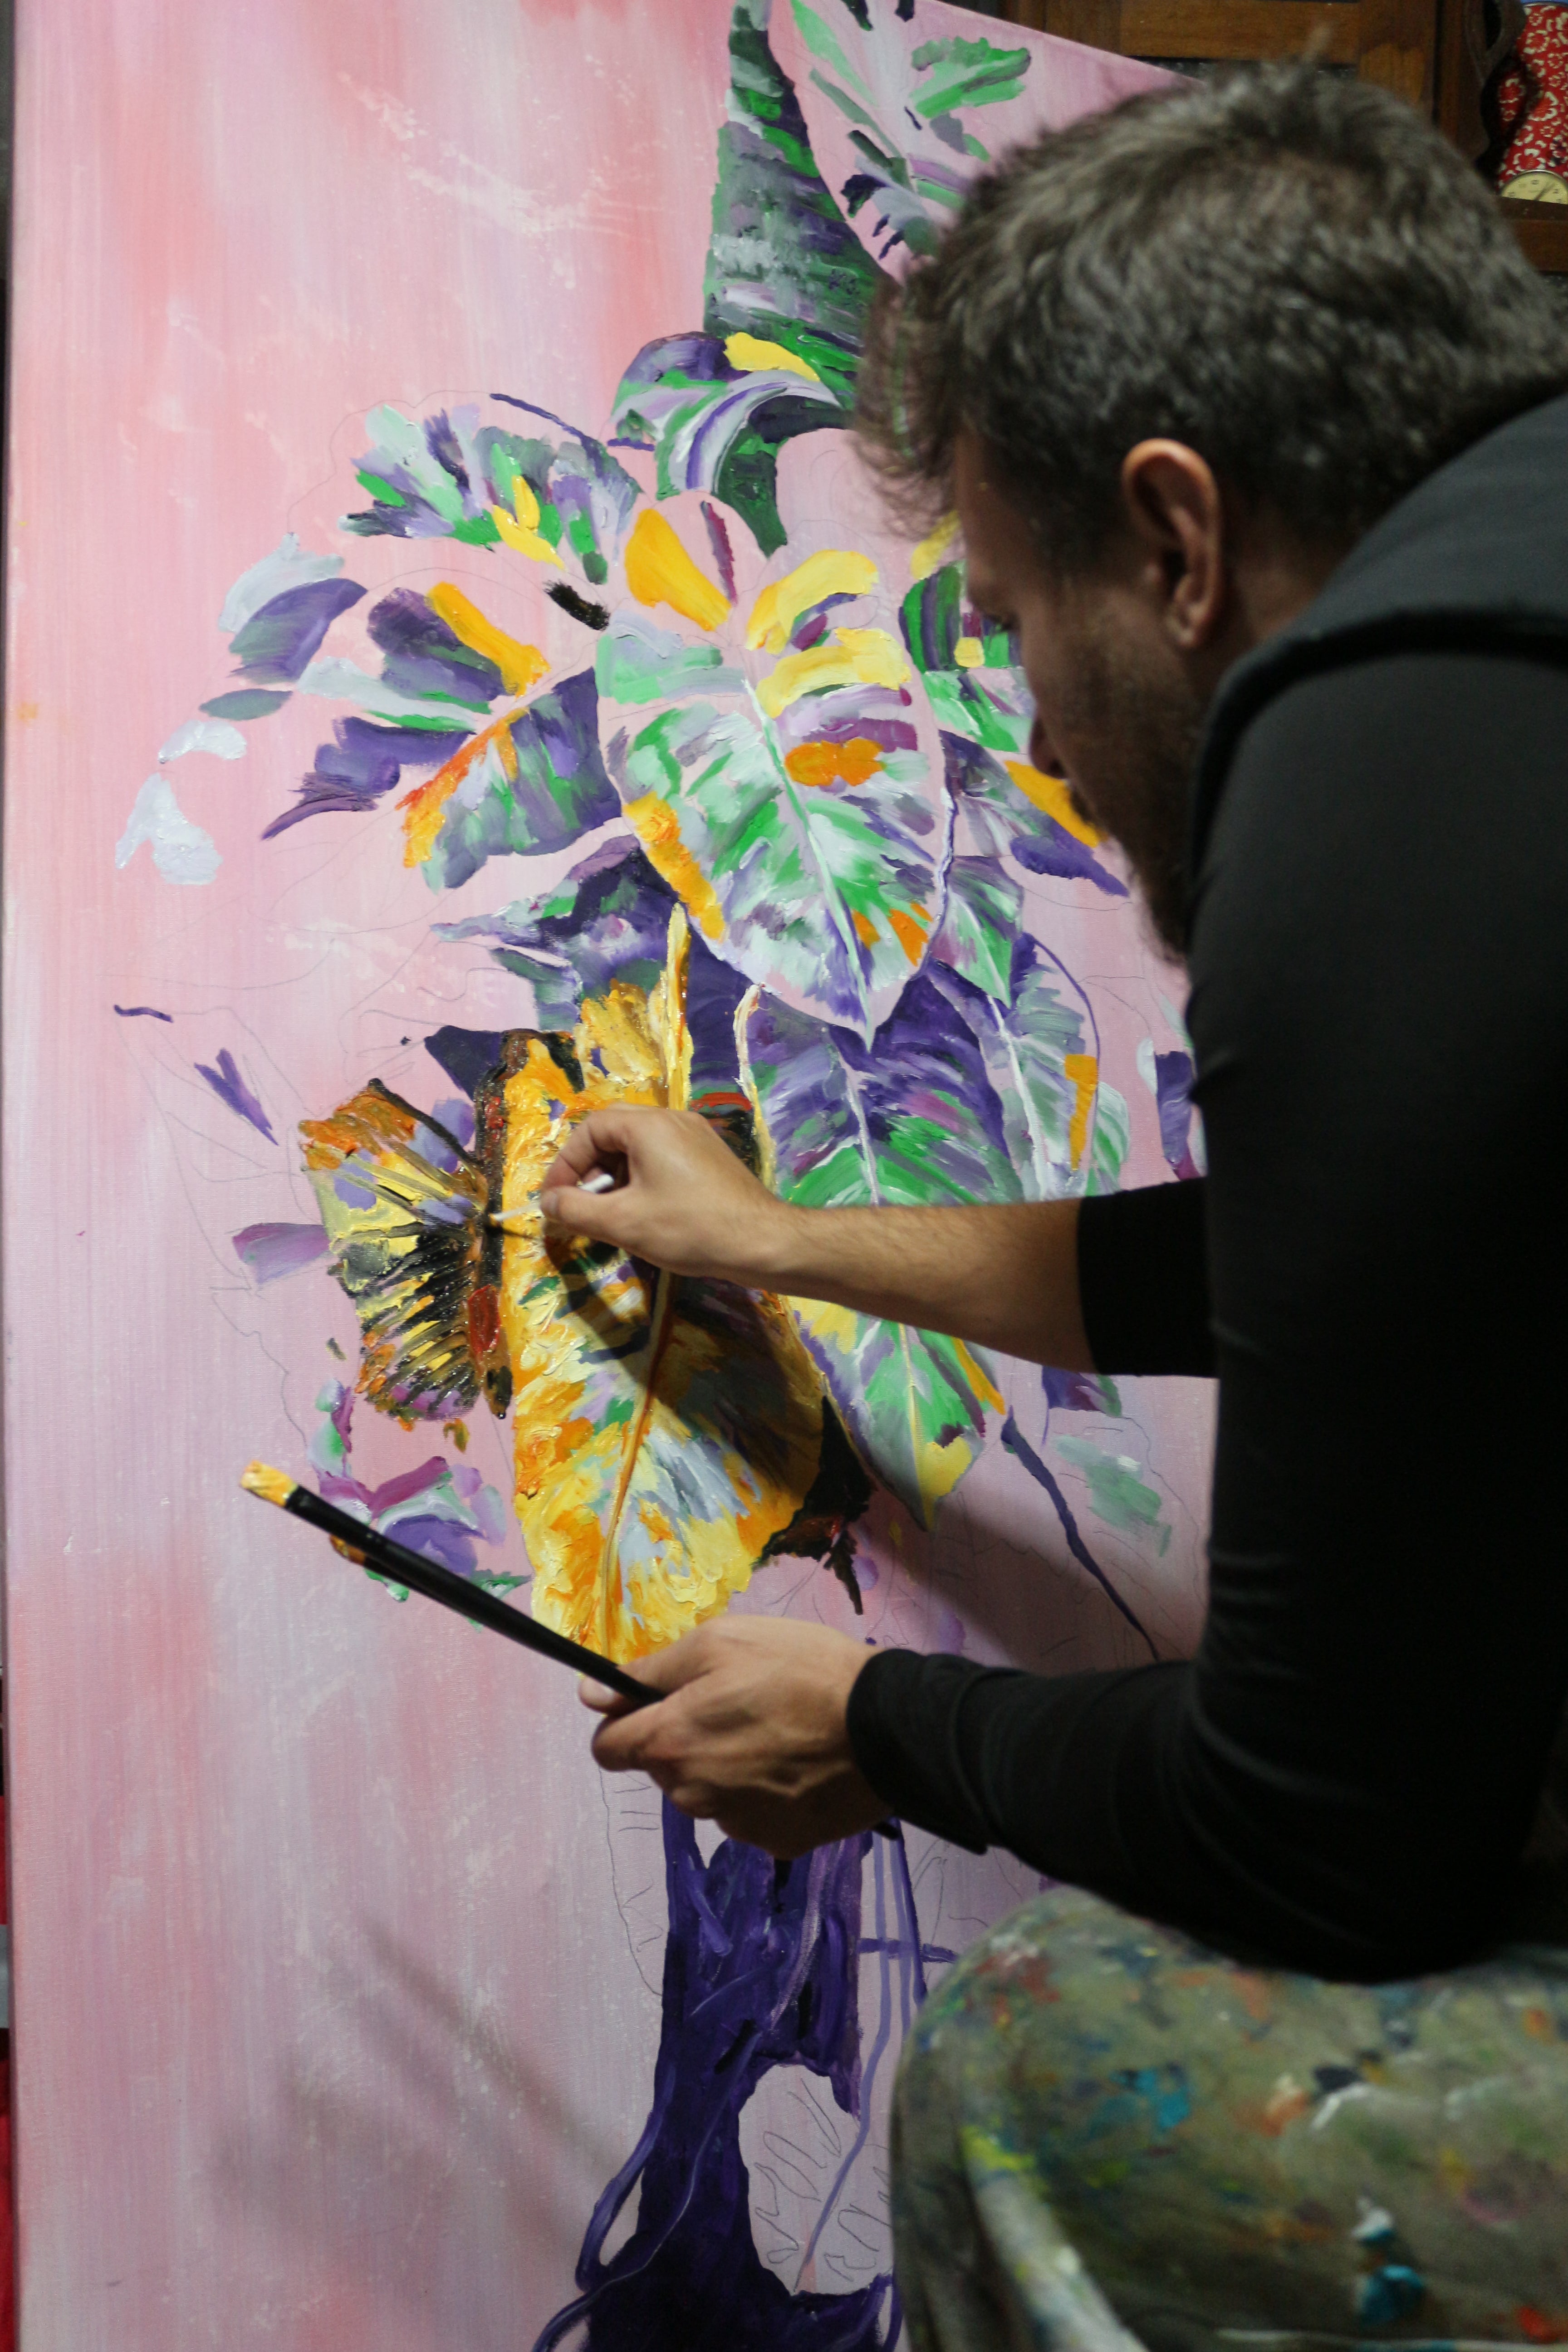 Dominic Virtosu painting the artwork "Jungle" in the winter between 2018 and 2019 in his country-side studio in Romania.